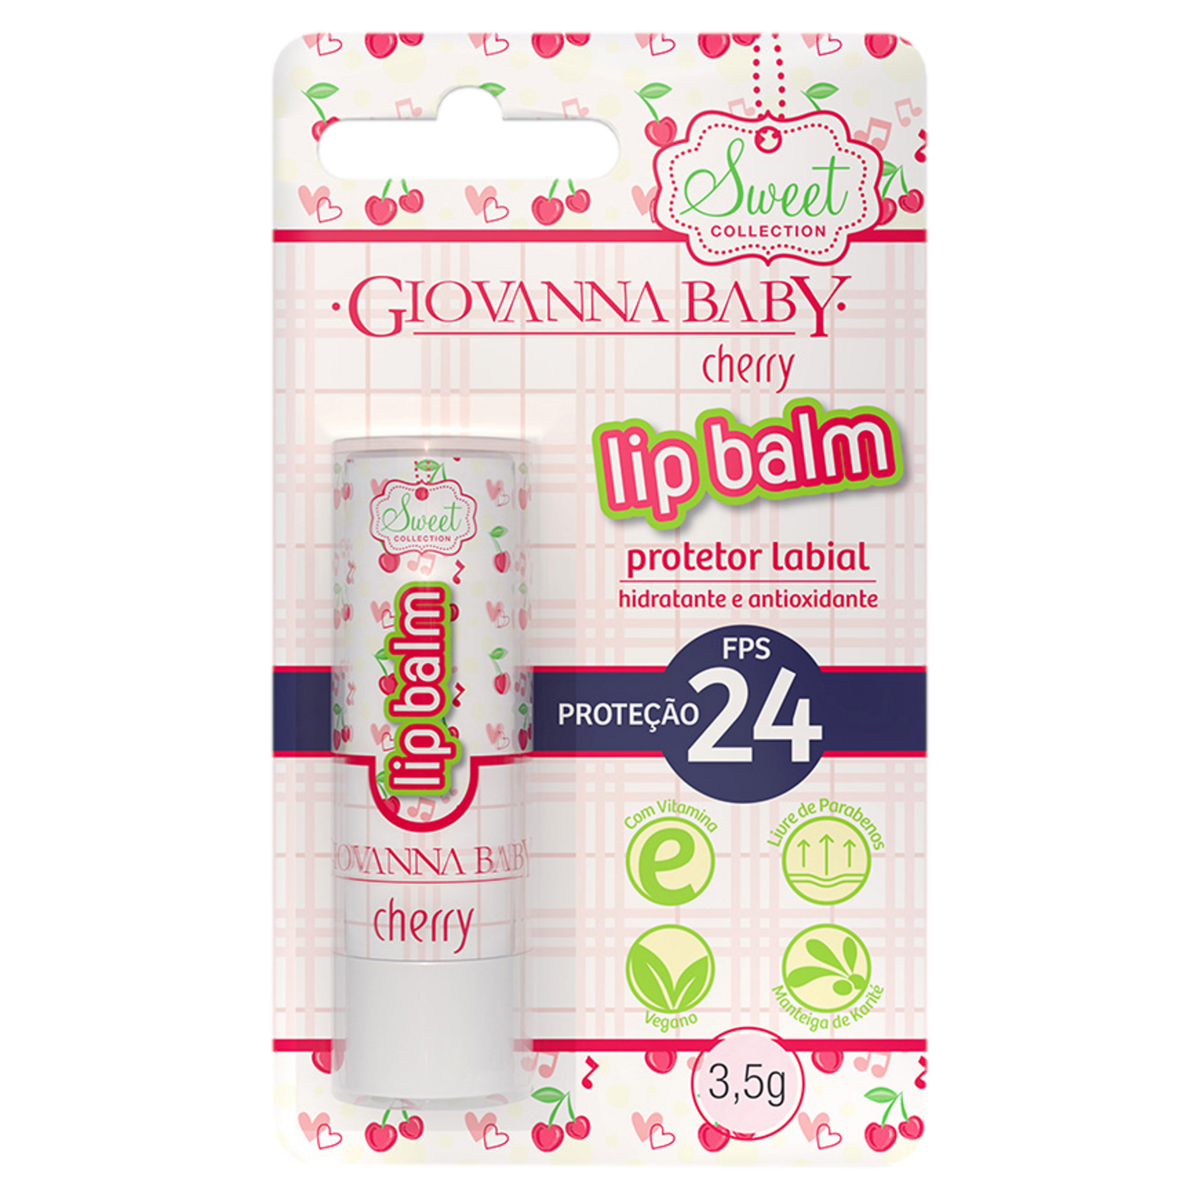 7896044900863 - PROTETOR LABIAL LIP BALM CHERRY FPS 24 GIOVANNA BABY SWEET COLLECTION BLISTER 3,5G